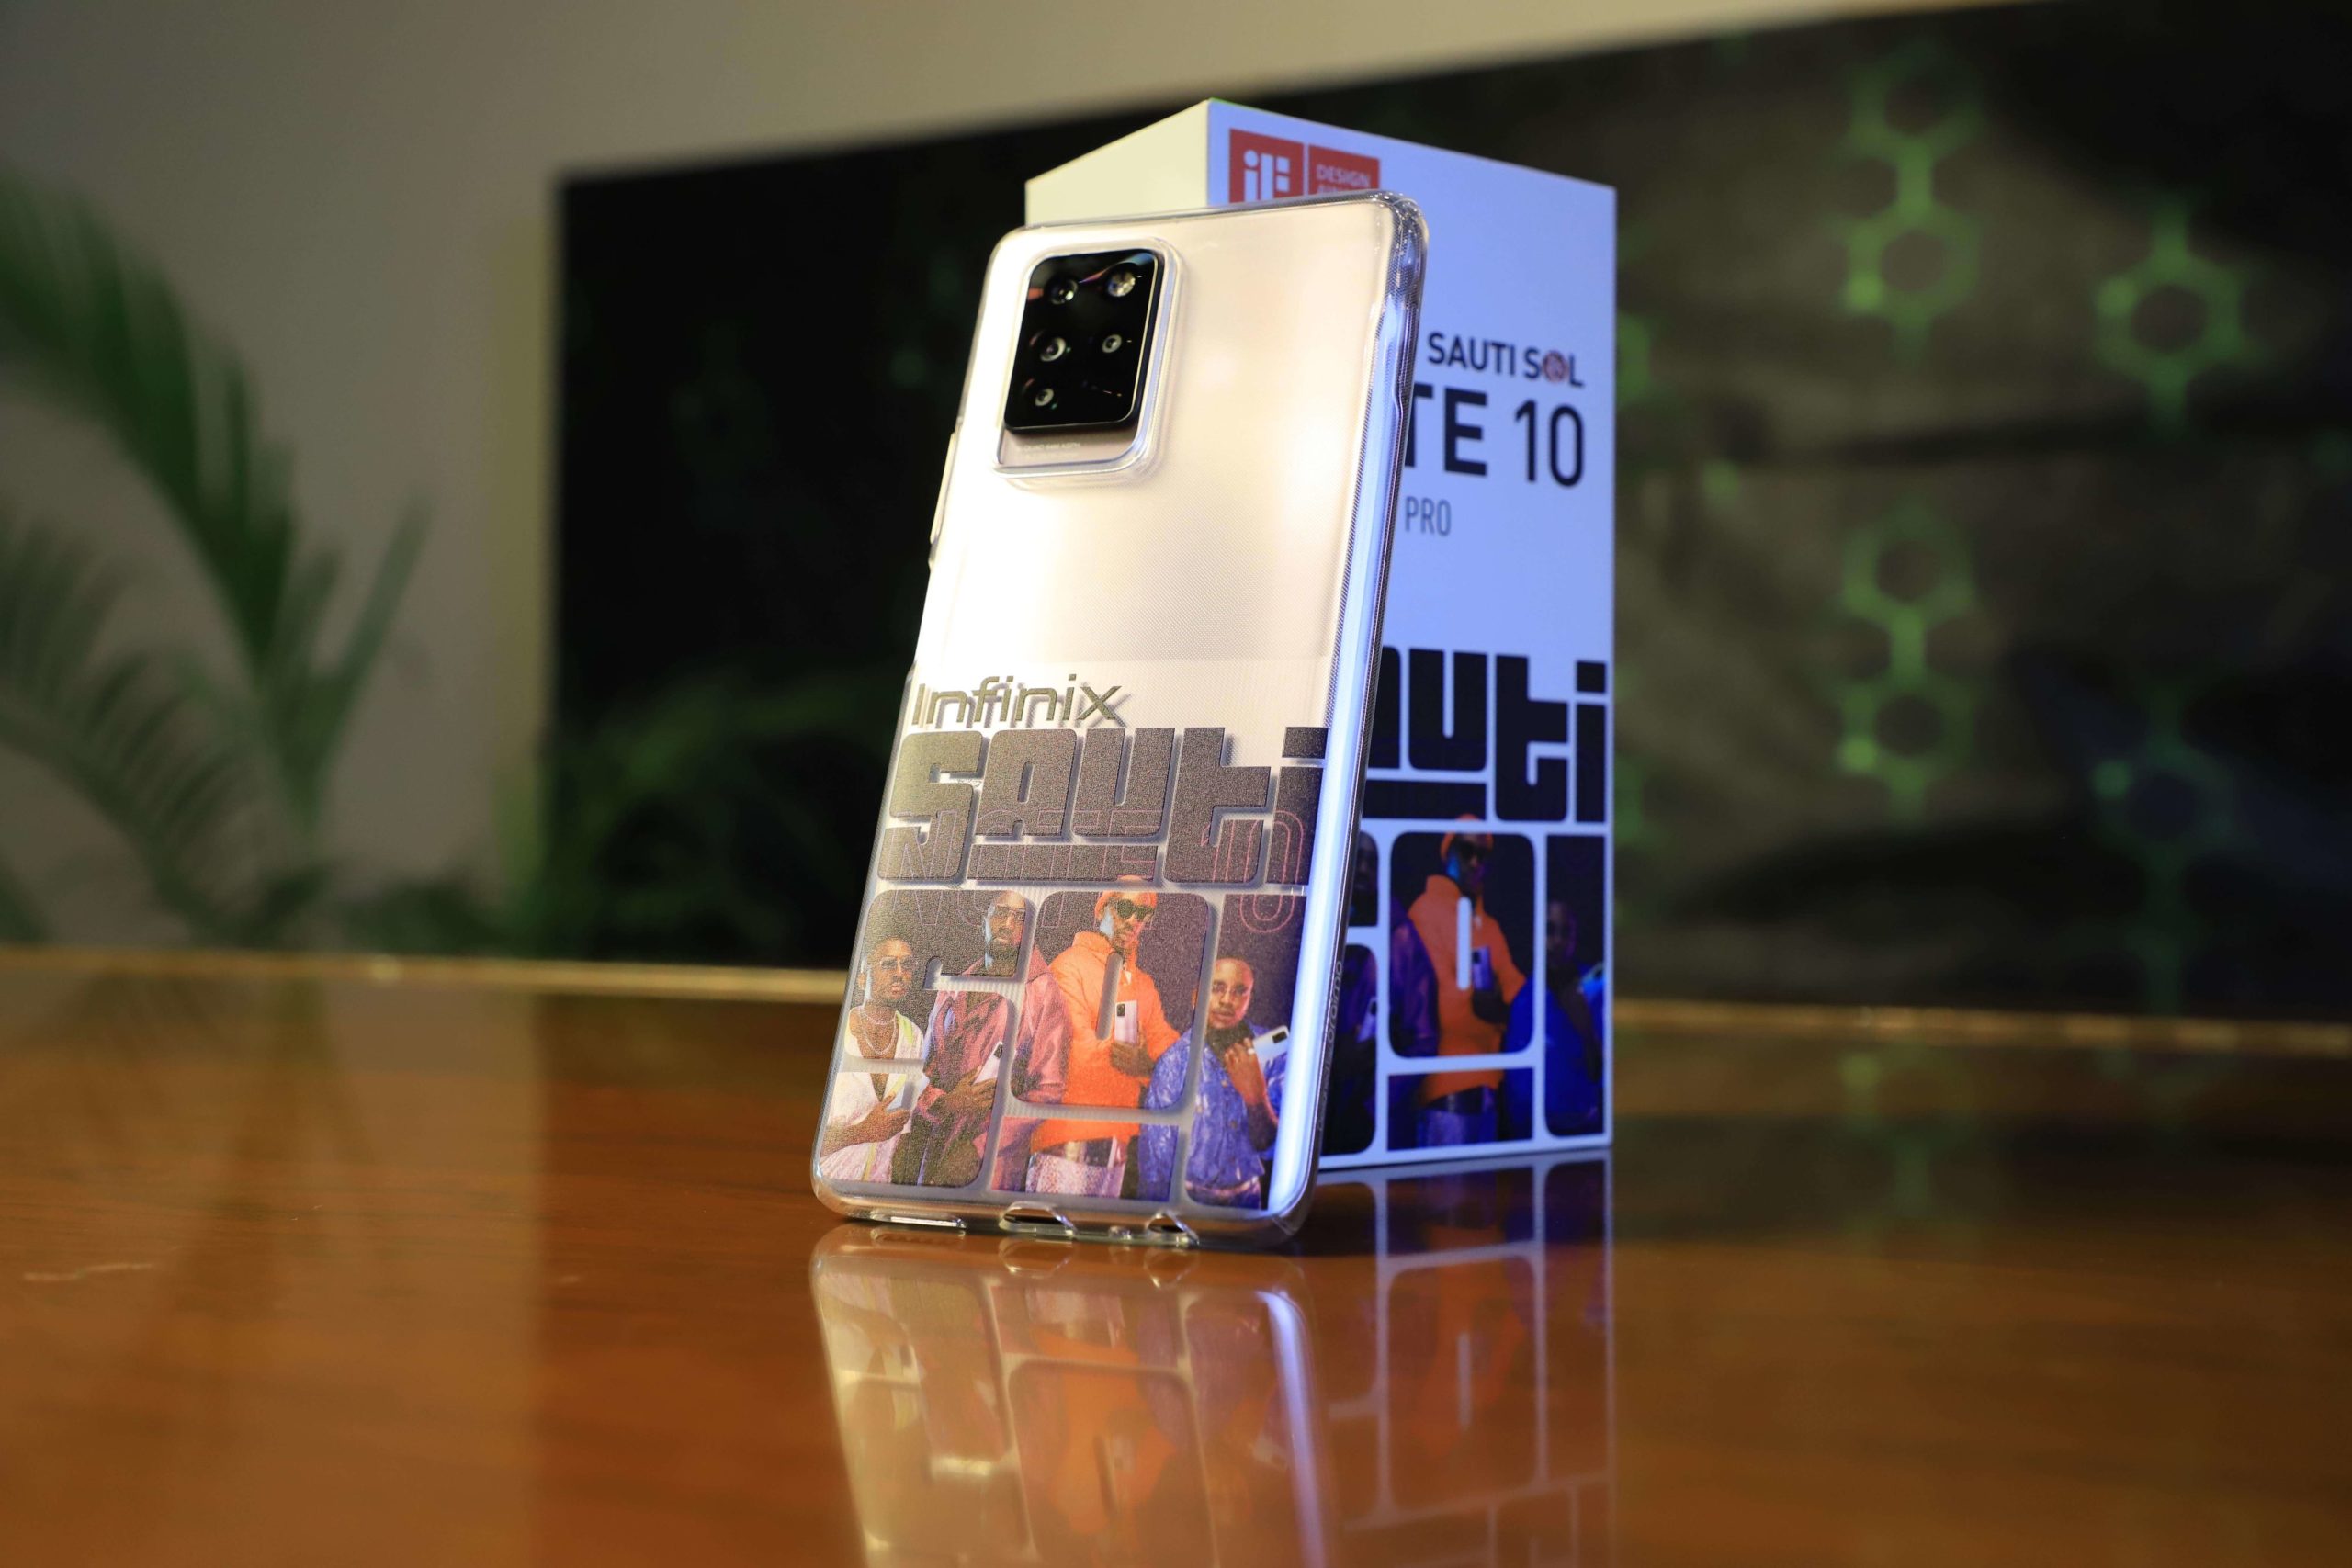 Infinix launches Limited Edition Sauti Sol NOTE 10 PRO